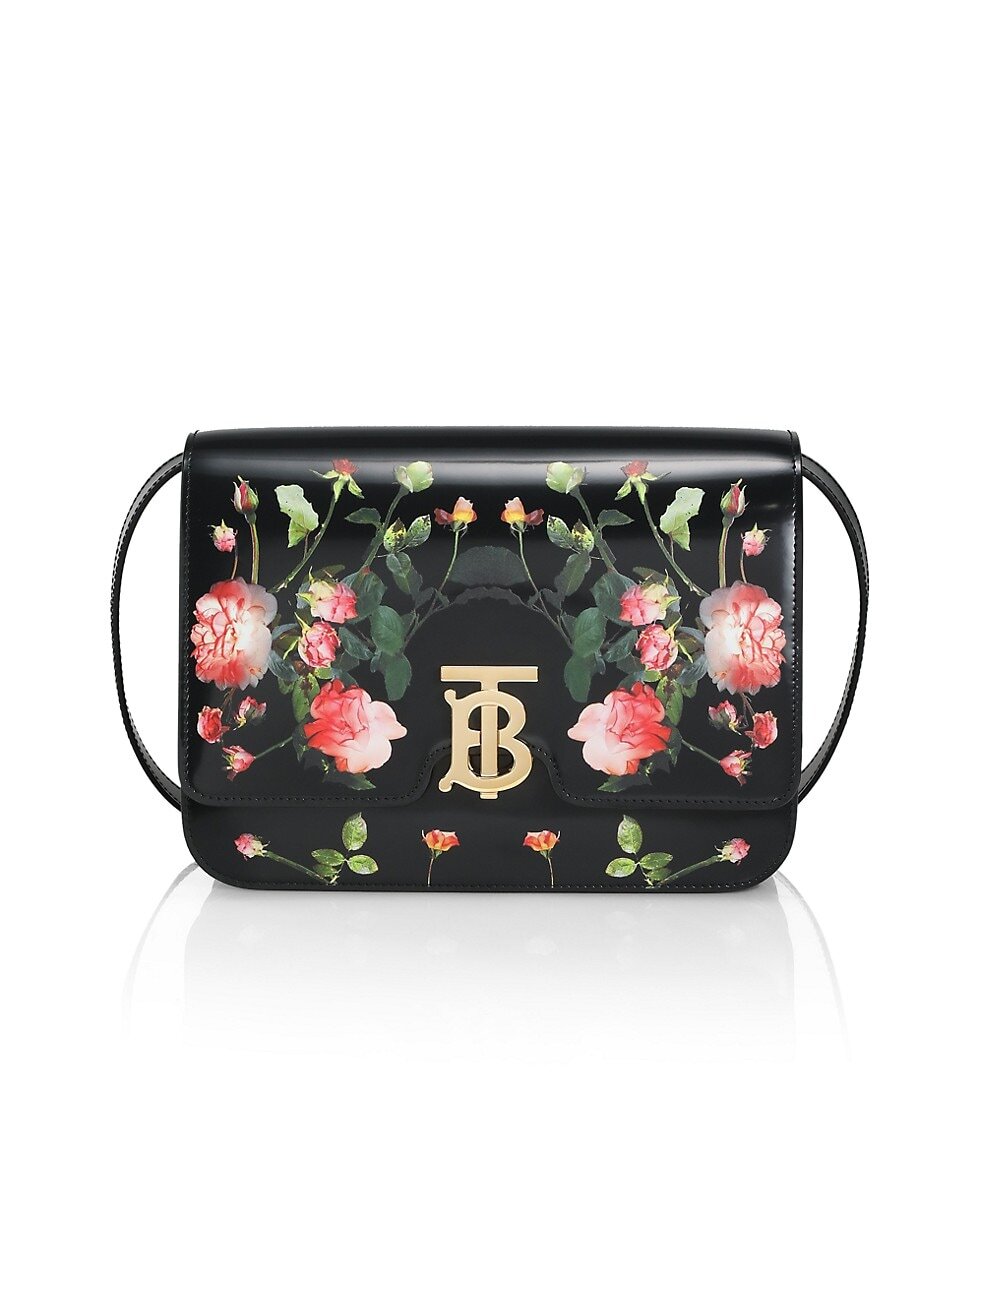 BURBERRY FLORAL LEATHER CROSSBODY